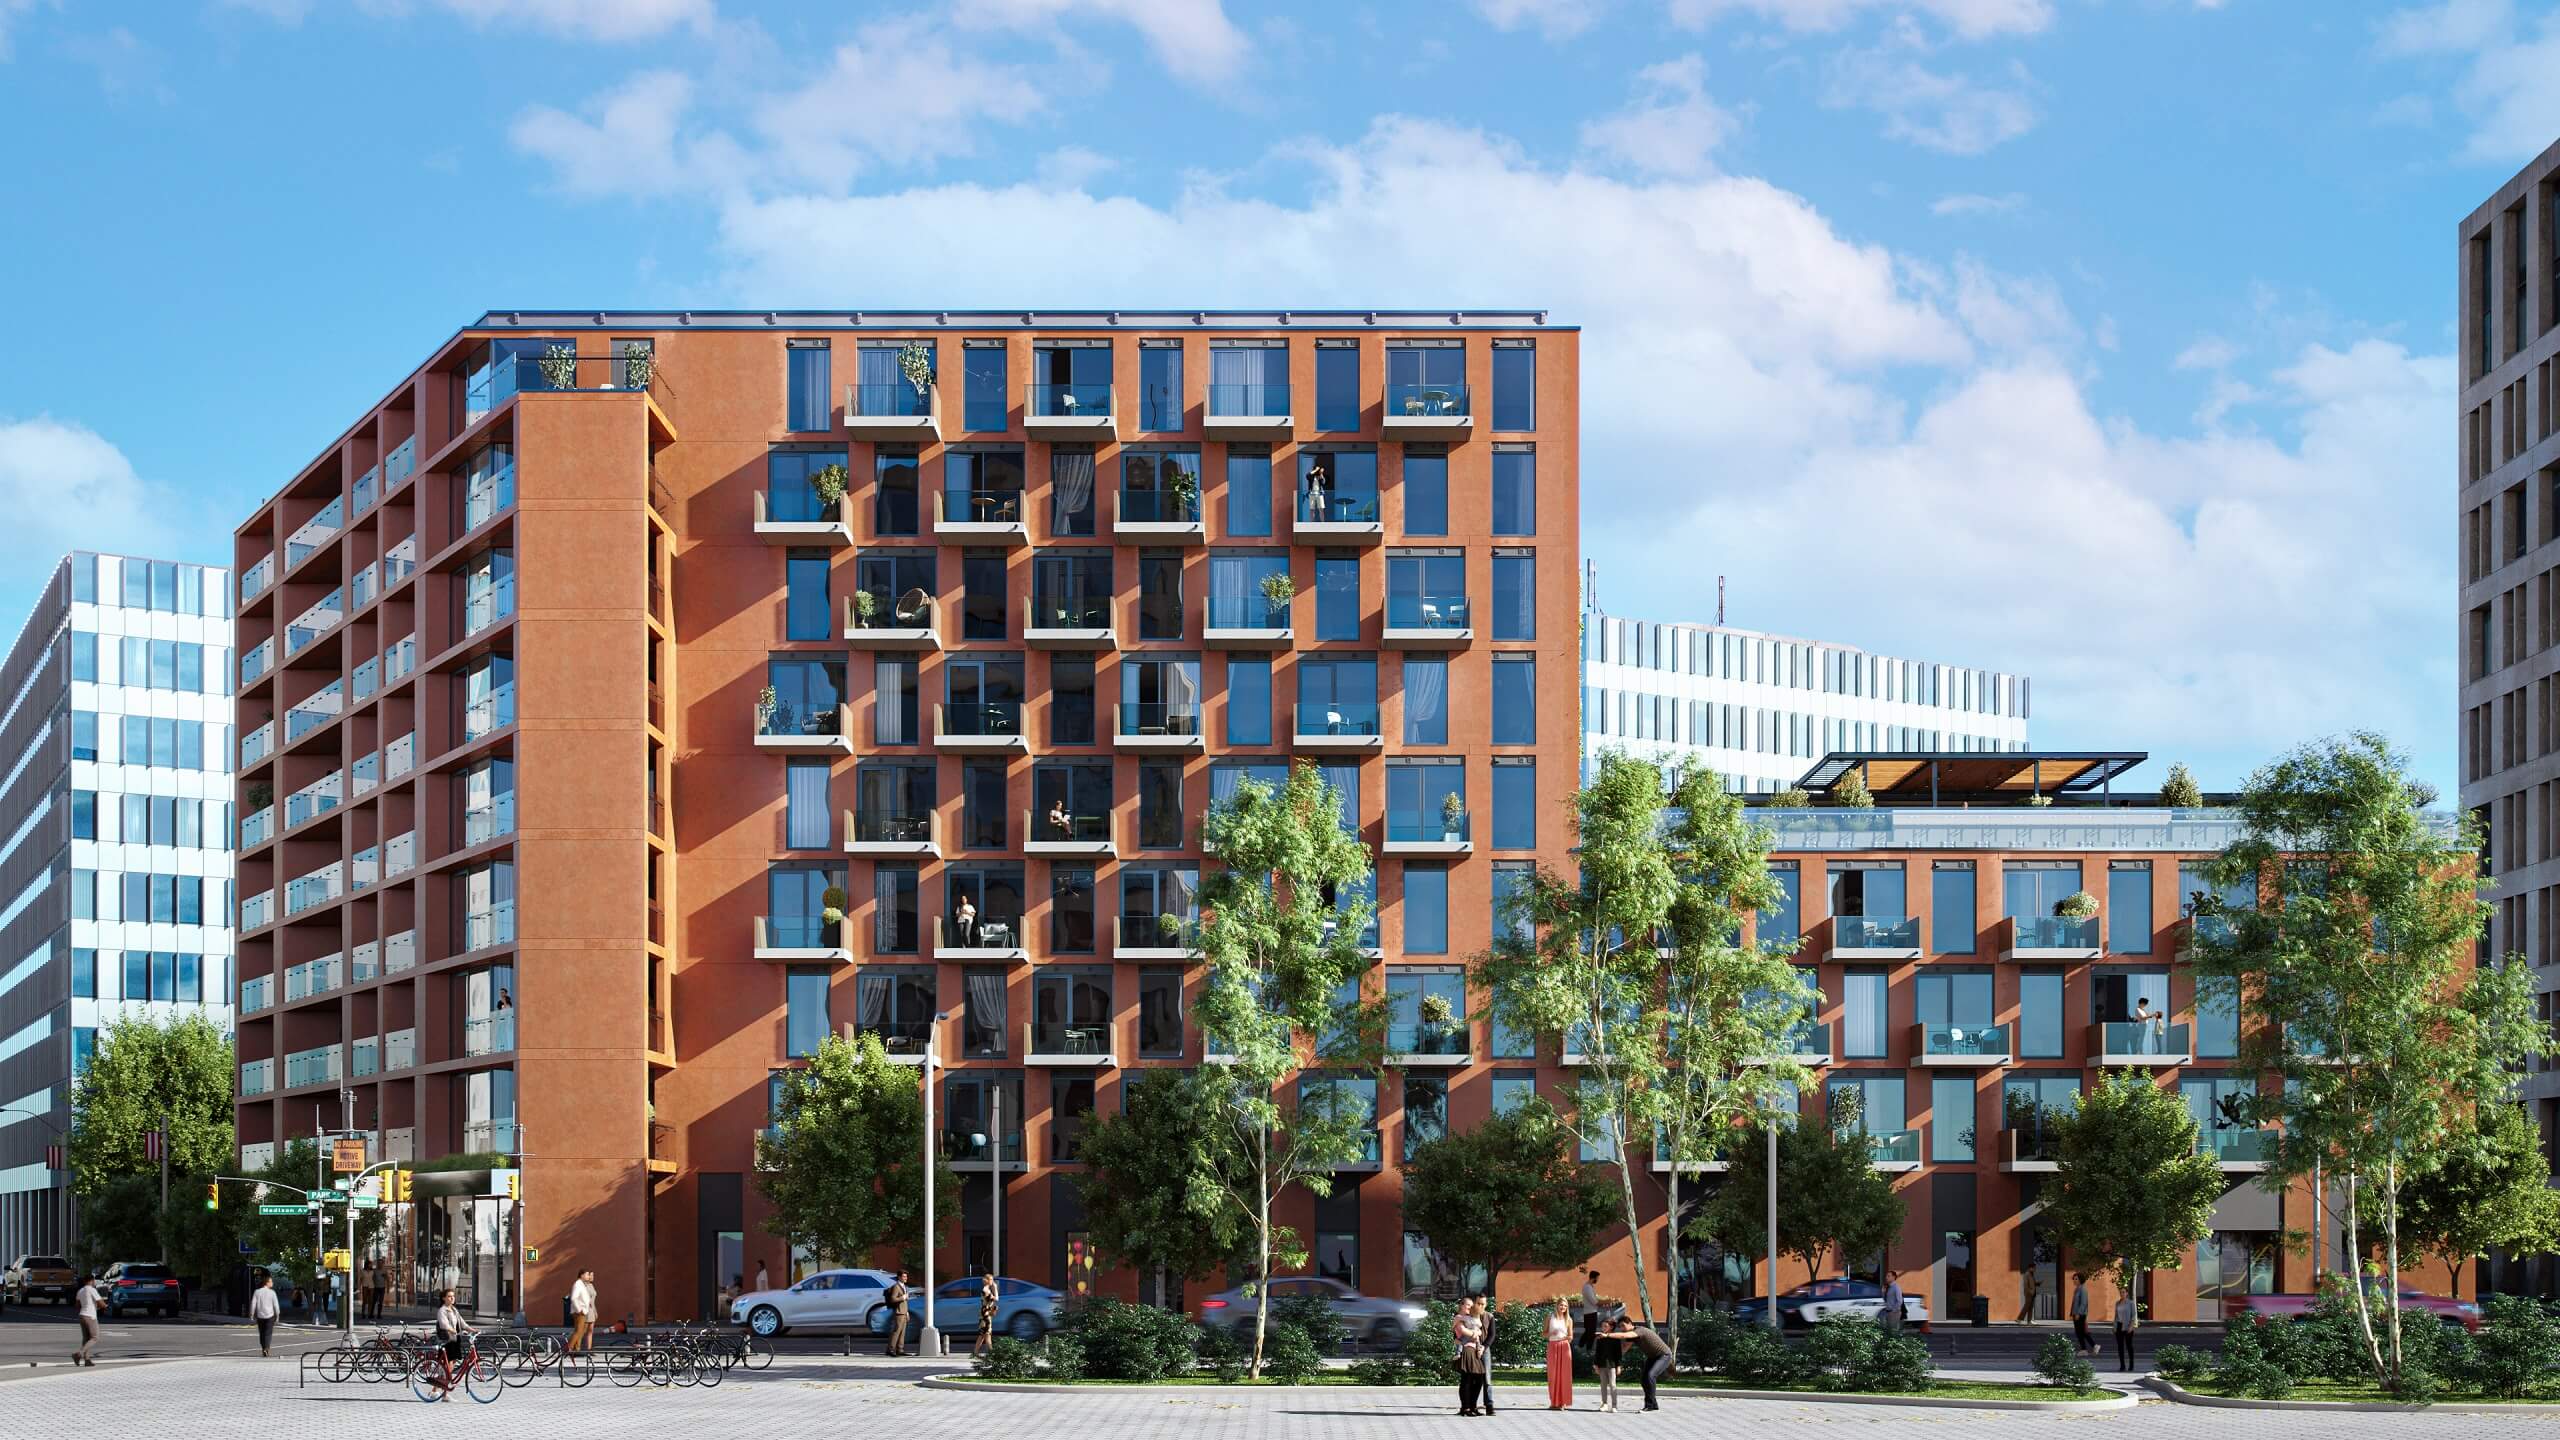 Exterior 3D Rendering of a Mid-rise Building